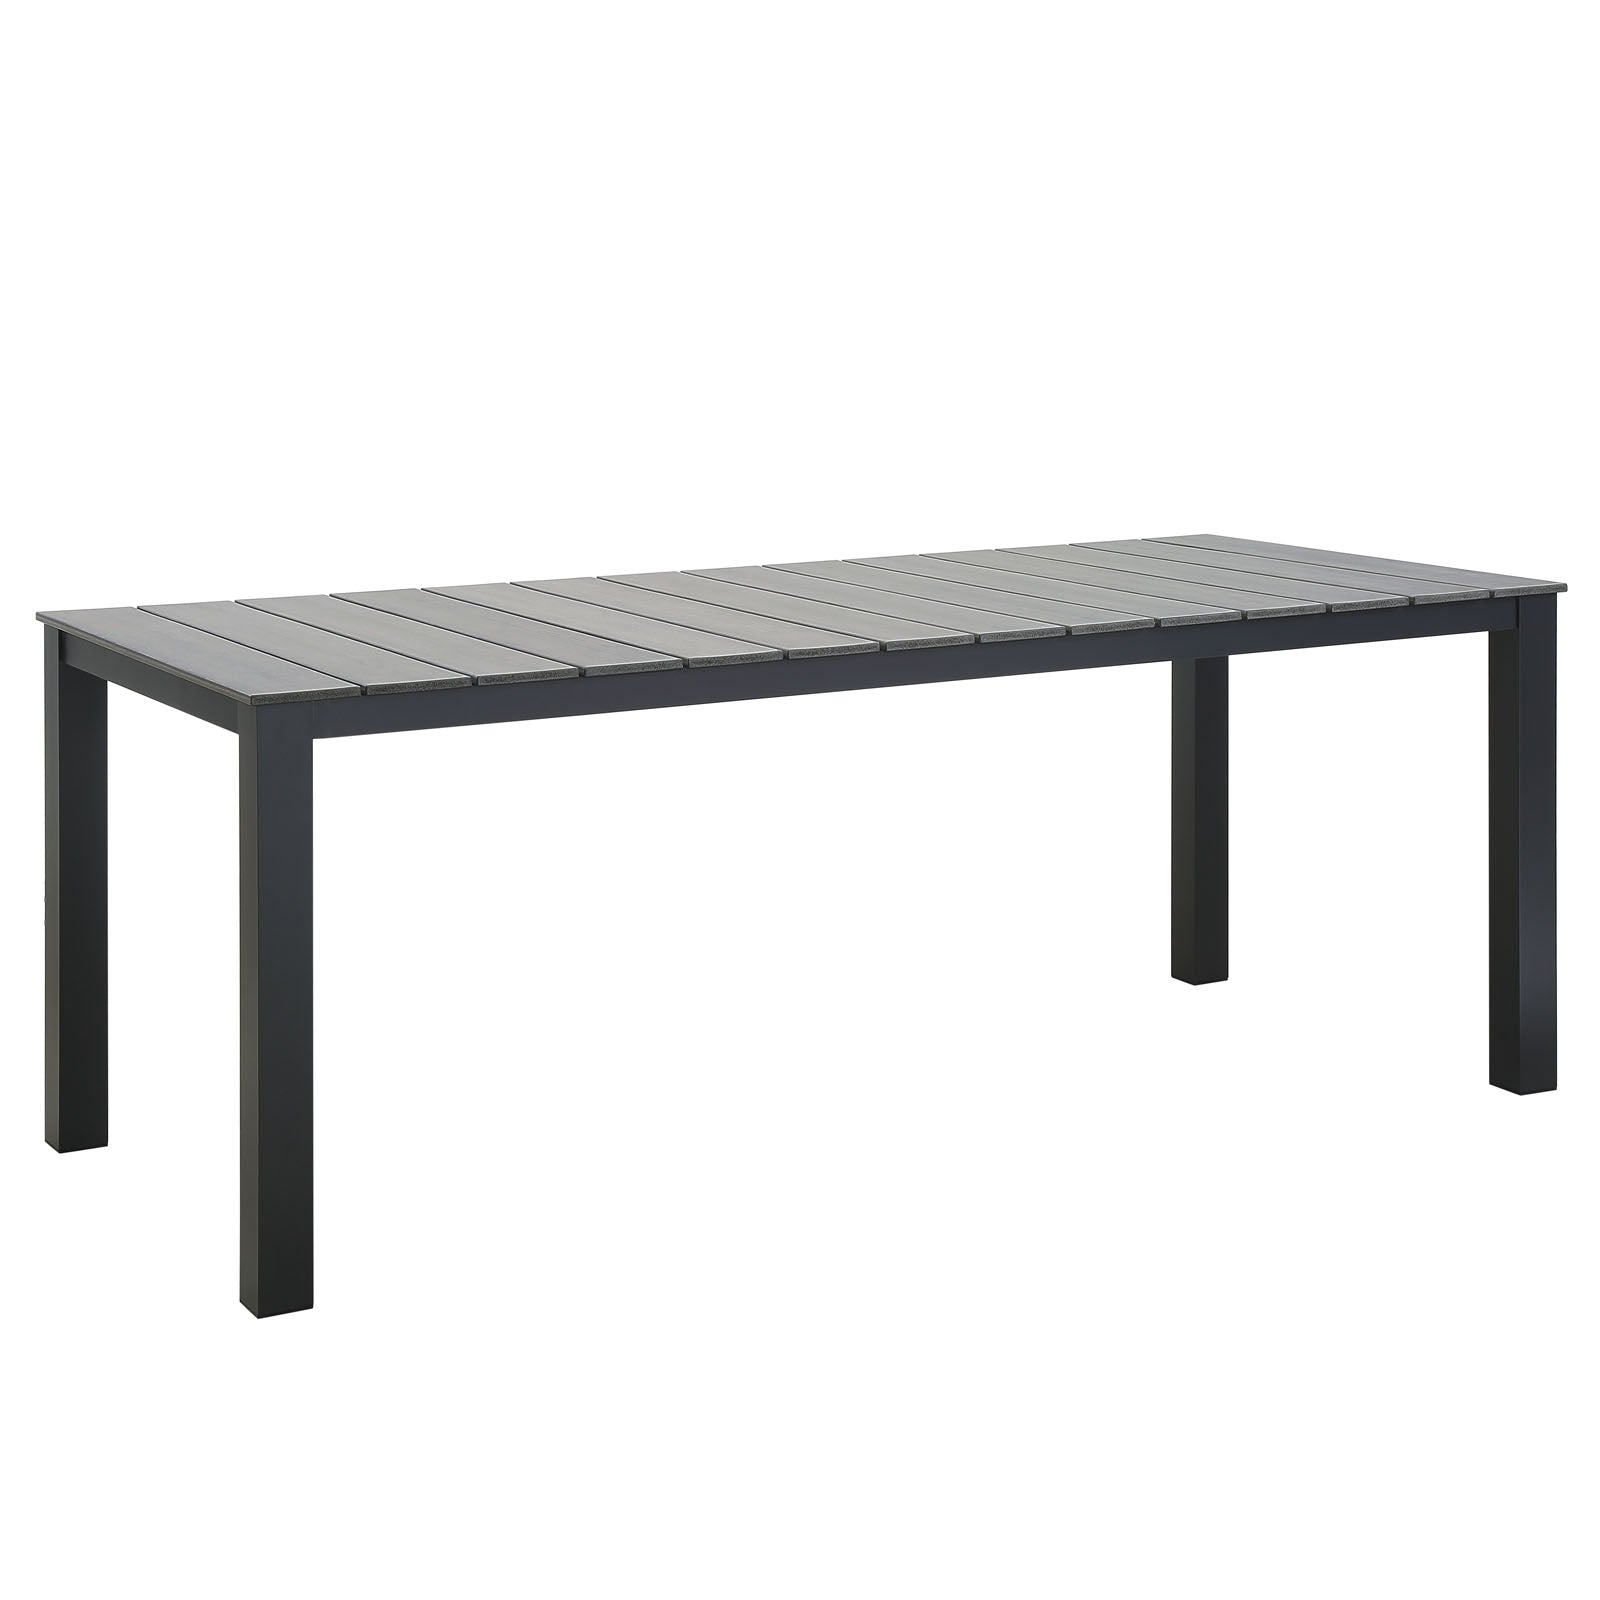 Maine 80" Outdoor Patio Dining Table - East Shore Modern Home Furnishings